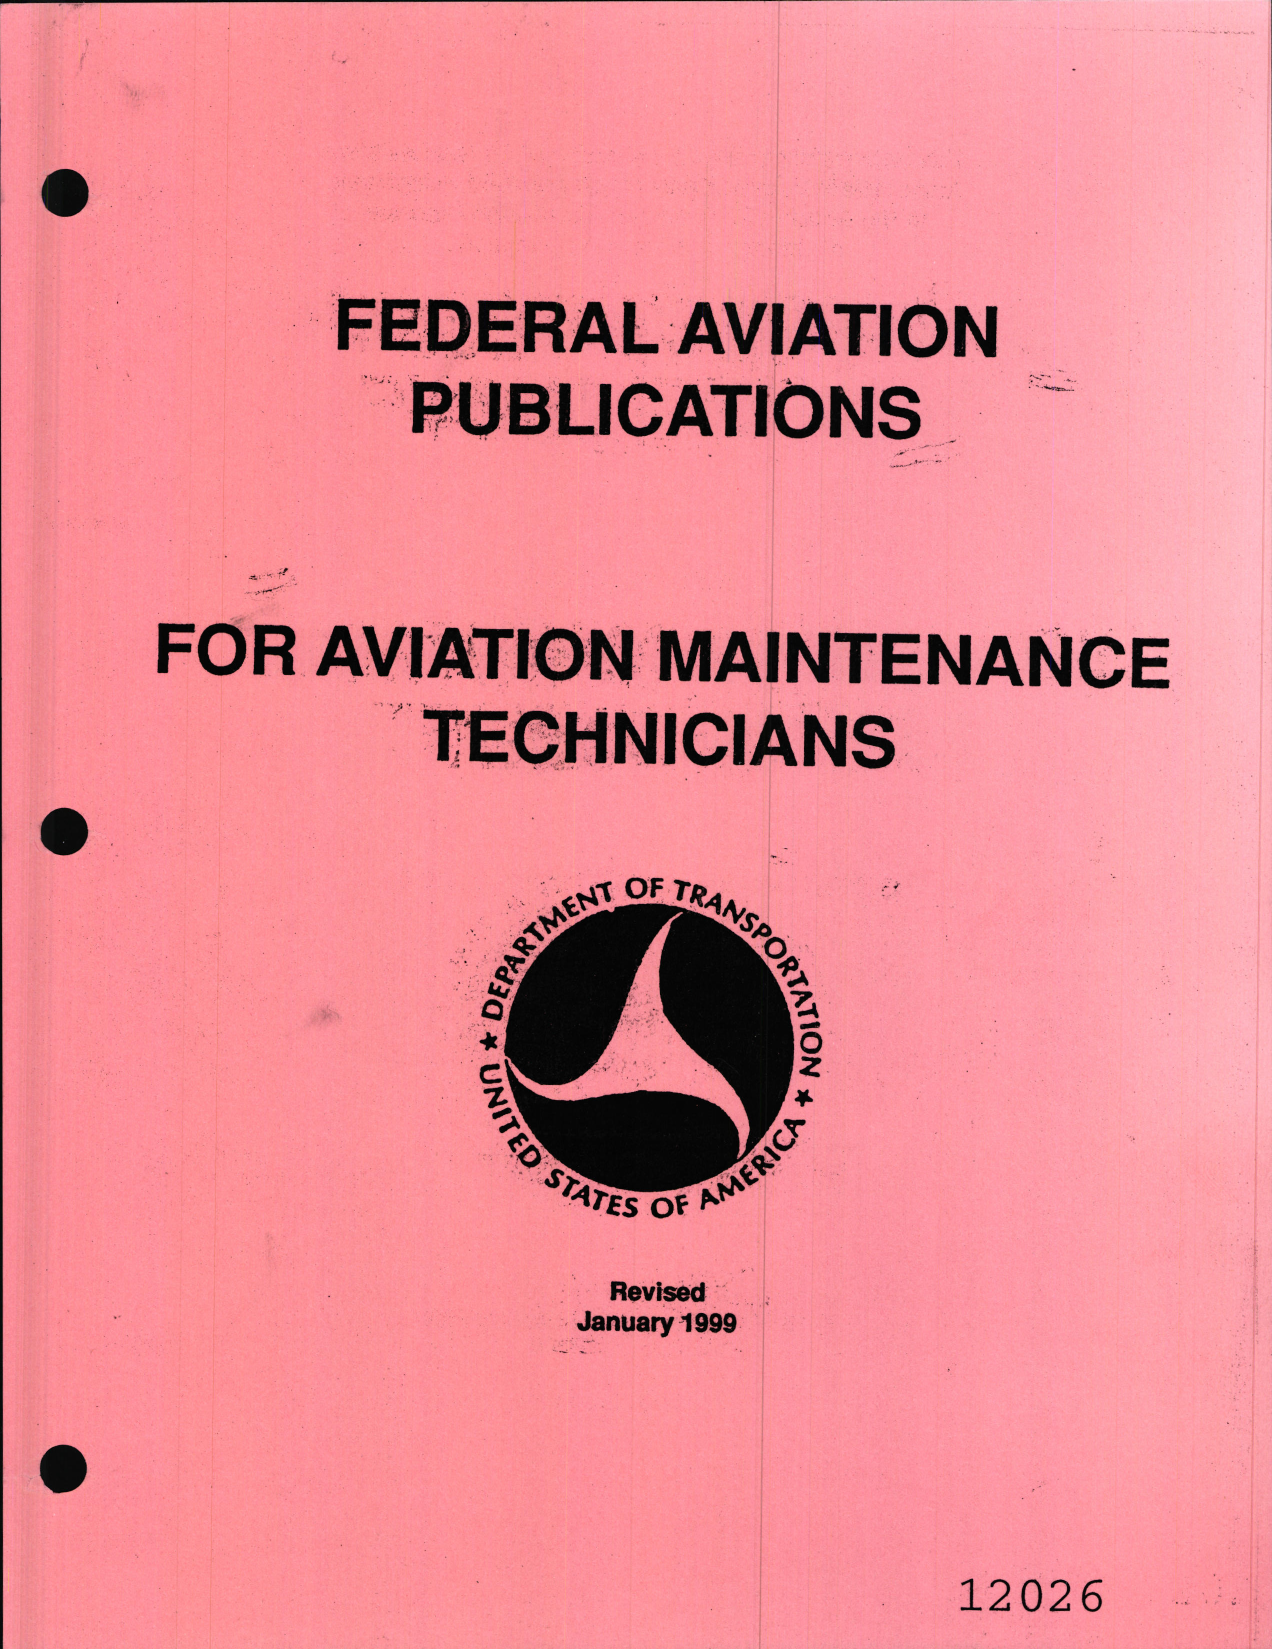 Sample page 1 from AirCorps Library document: Federal Aviation Publications for Aviation Mechanics